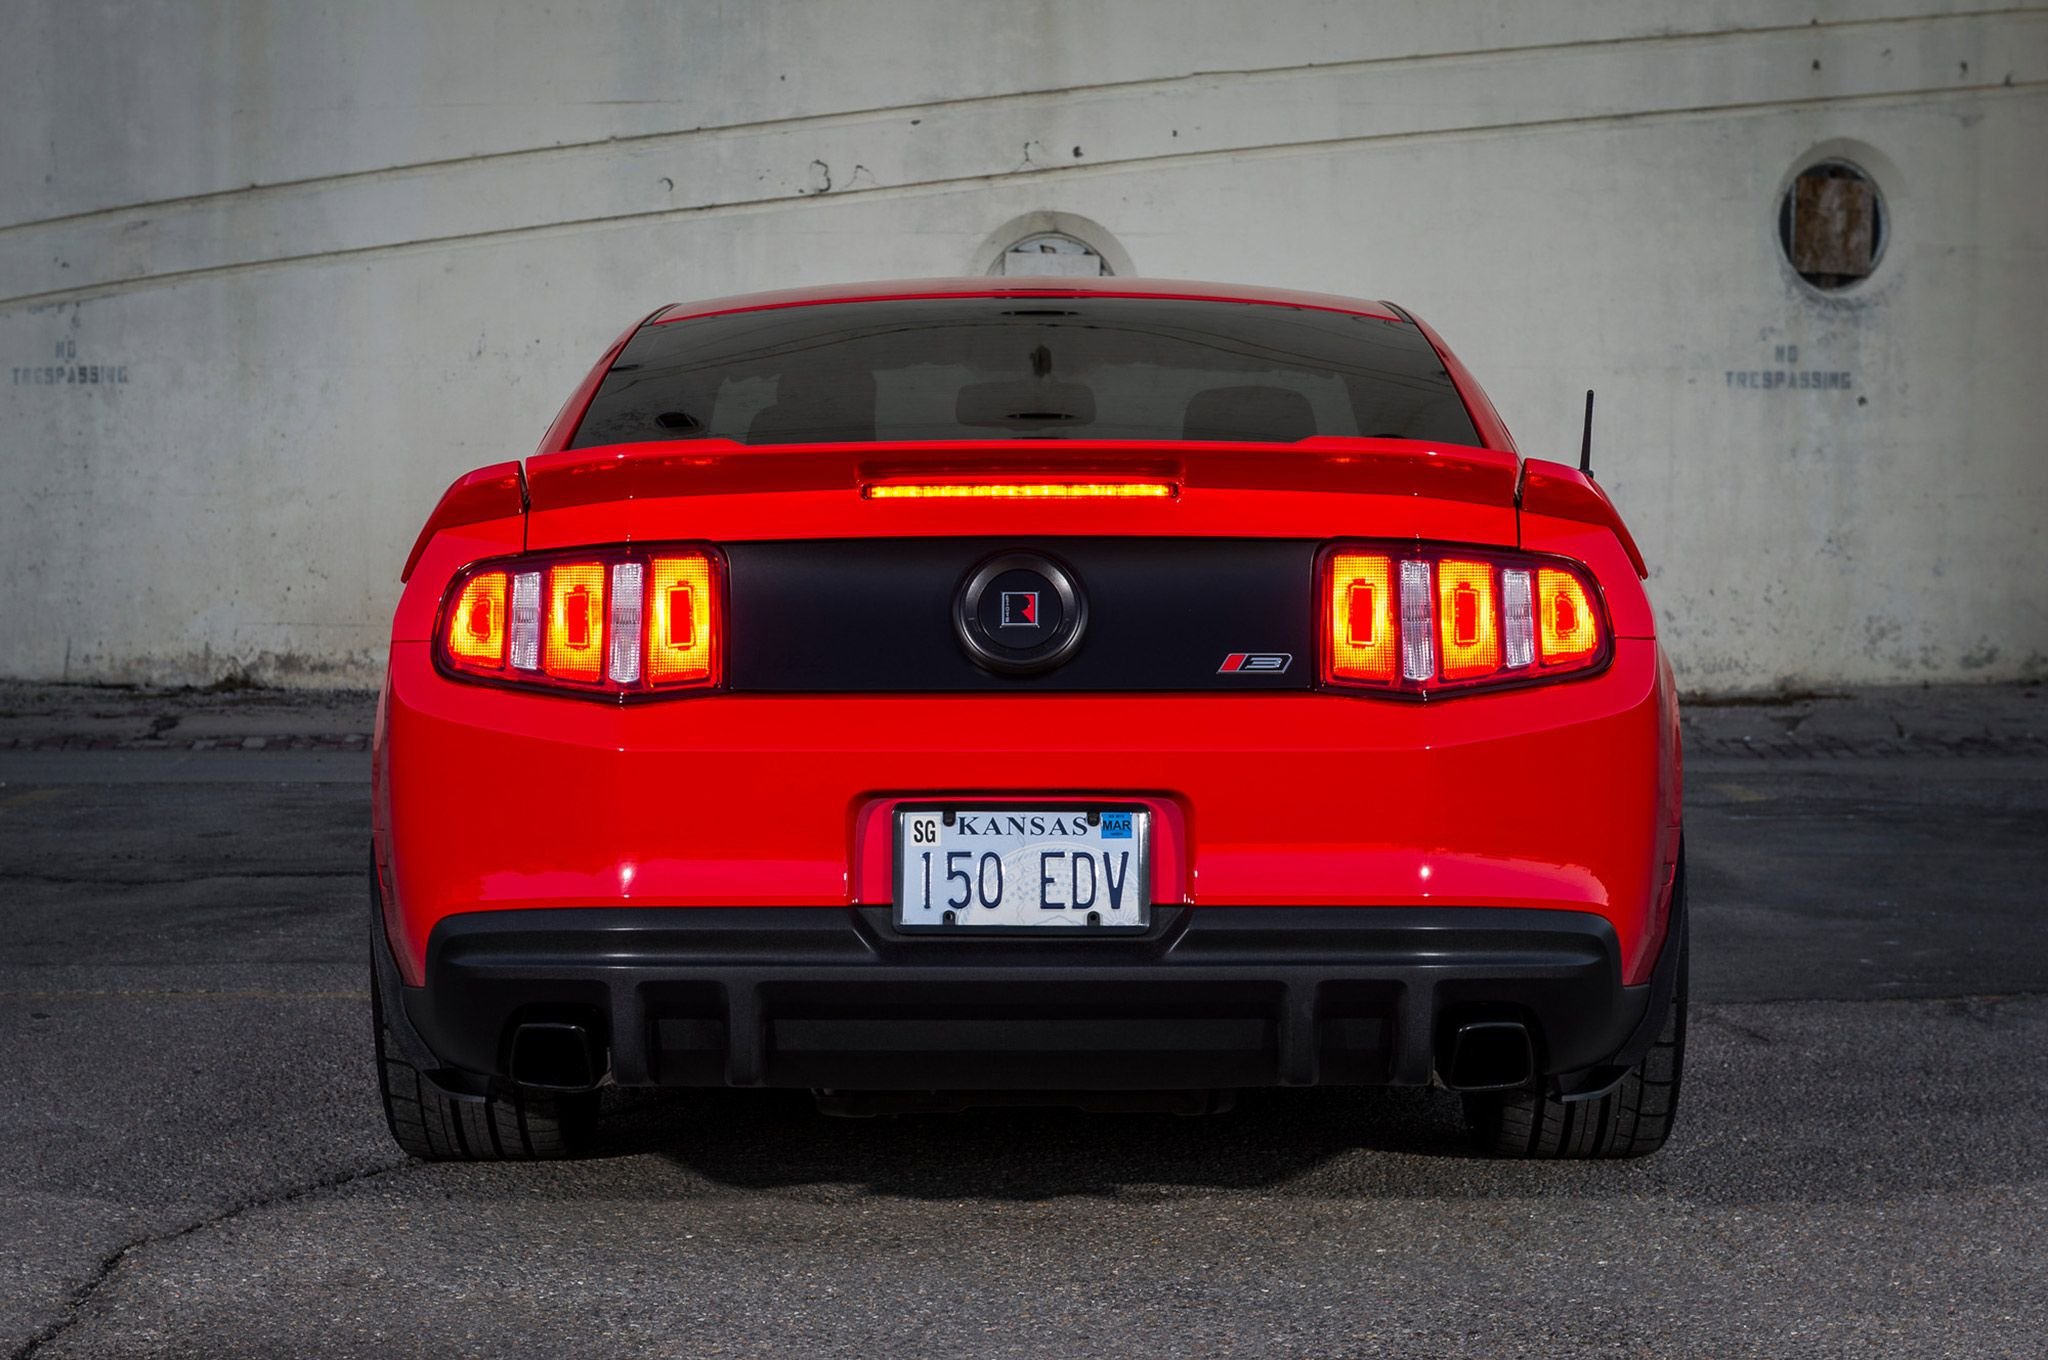 red, Roush, Rs3, Ford, Mustang, Cars Wallpaper